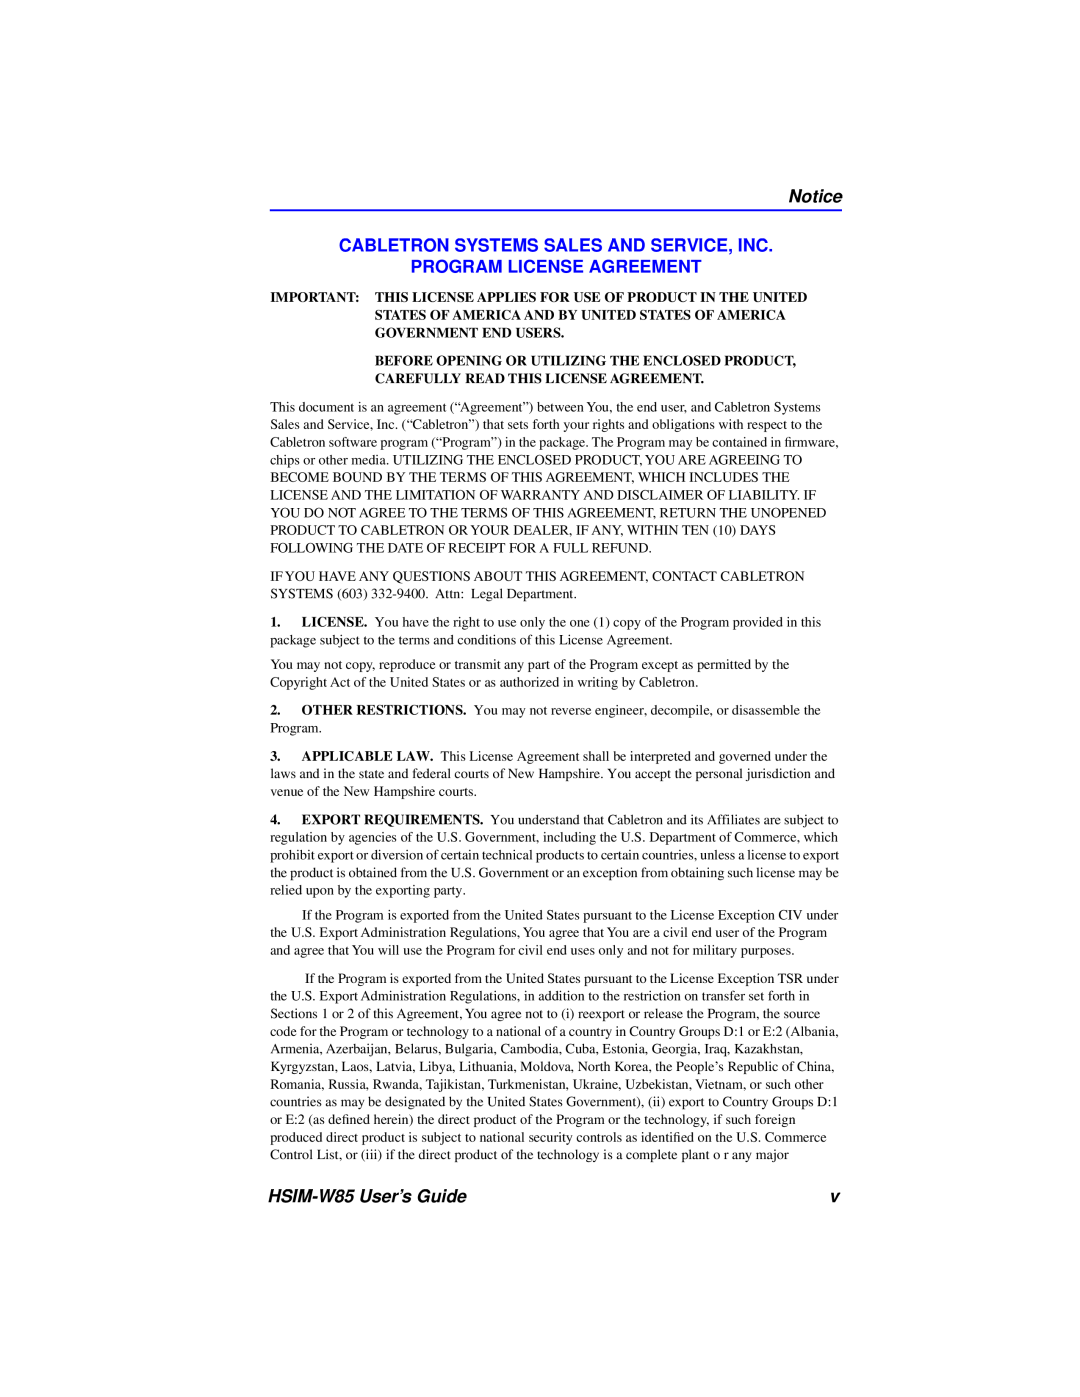 Cabletron Systems manual Cabletron Systems Sales And Service, Inc Program License Agreement, HSIM-W85 User’s Guide 